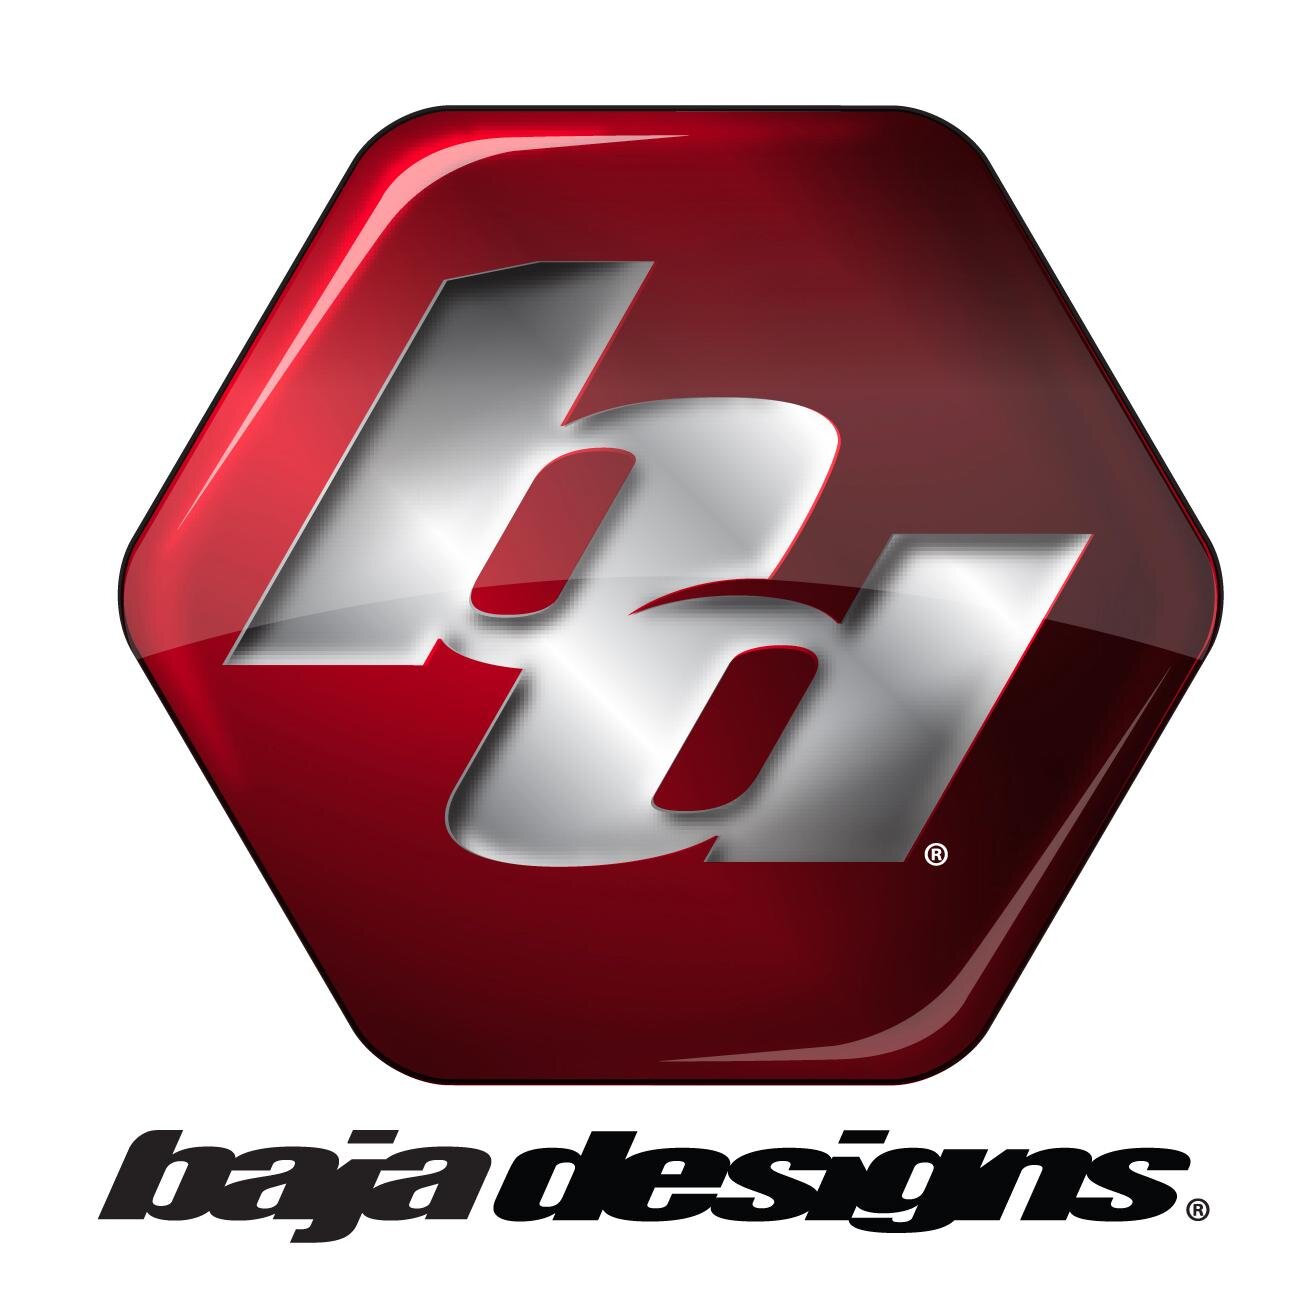 Baja Designs has been manufacturing off-road lighting products and accessories since 1992 - If you're scared of the dark...you haven't seen the light!